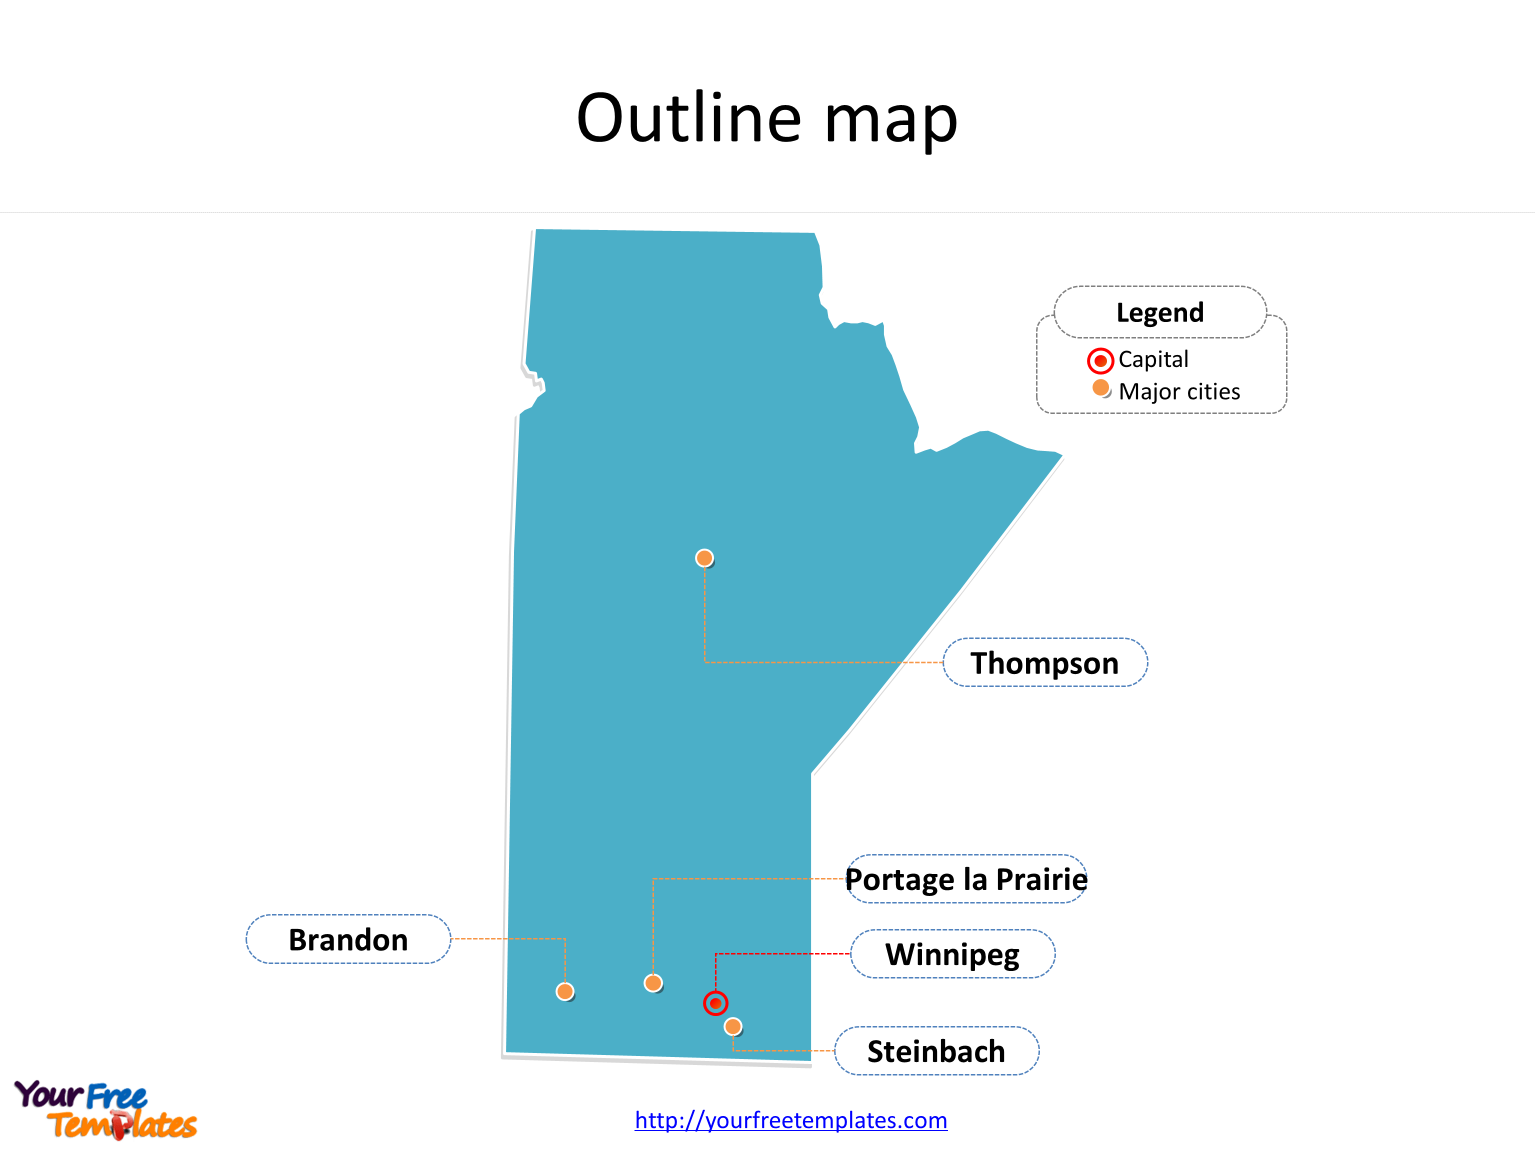 Province of Manitoba map with outline and cities labeled on the Manitoba maps PowerPoint templates